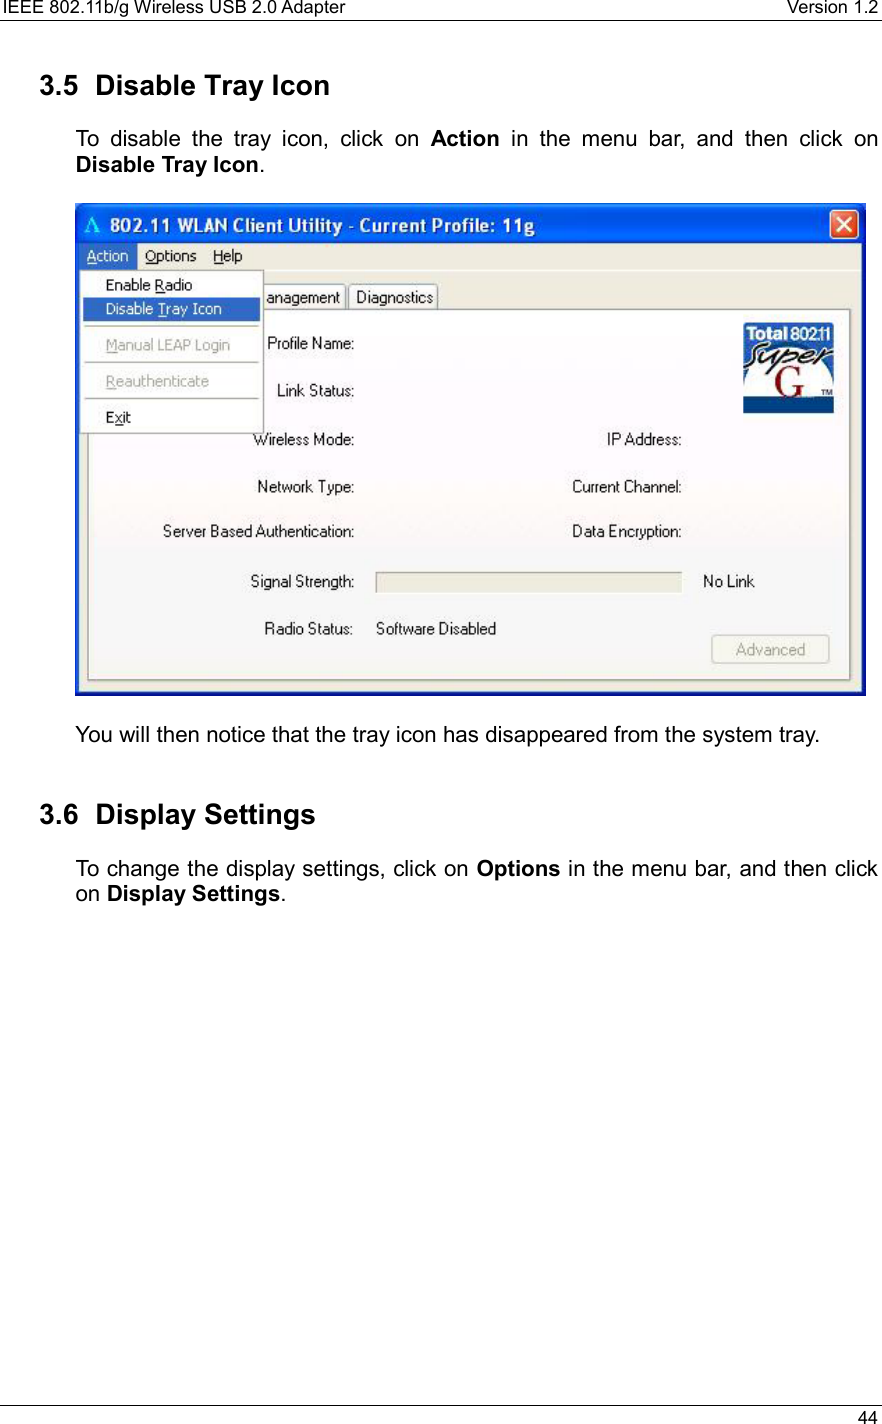 IEEE 802.11b/g Wireless USB 2.0 Adapter    Version 1.2   44  3.5  Disable Tray Icon To disable the tray icon, click on Action in the menu bar, and then click on Disable Tray Icon.      You will then notice that the tray icon has disappeared from the system tray.      3.6 Display Settings To change the display settings, click on Options in the menu bar, and then click on Display Settings.    